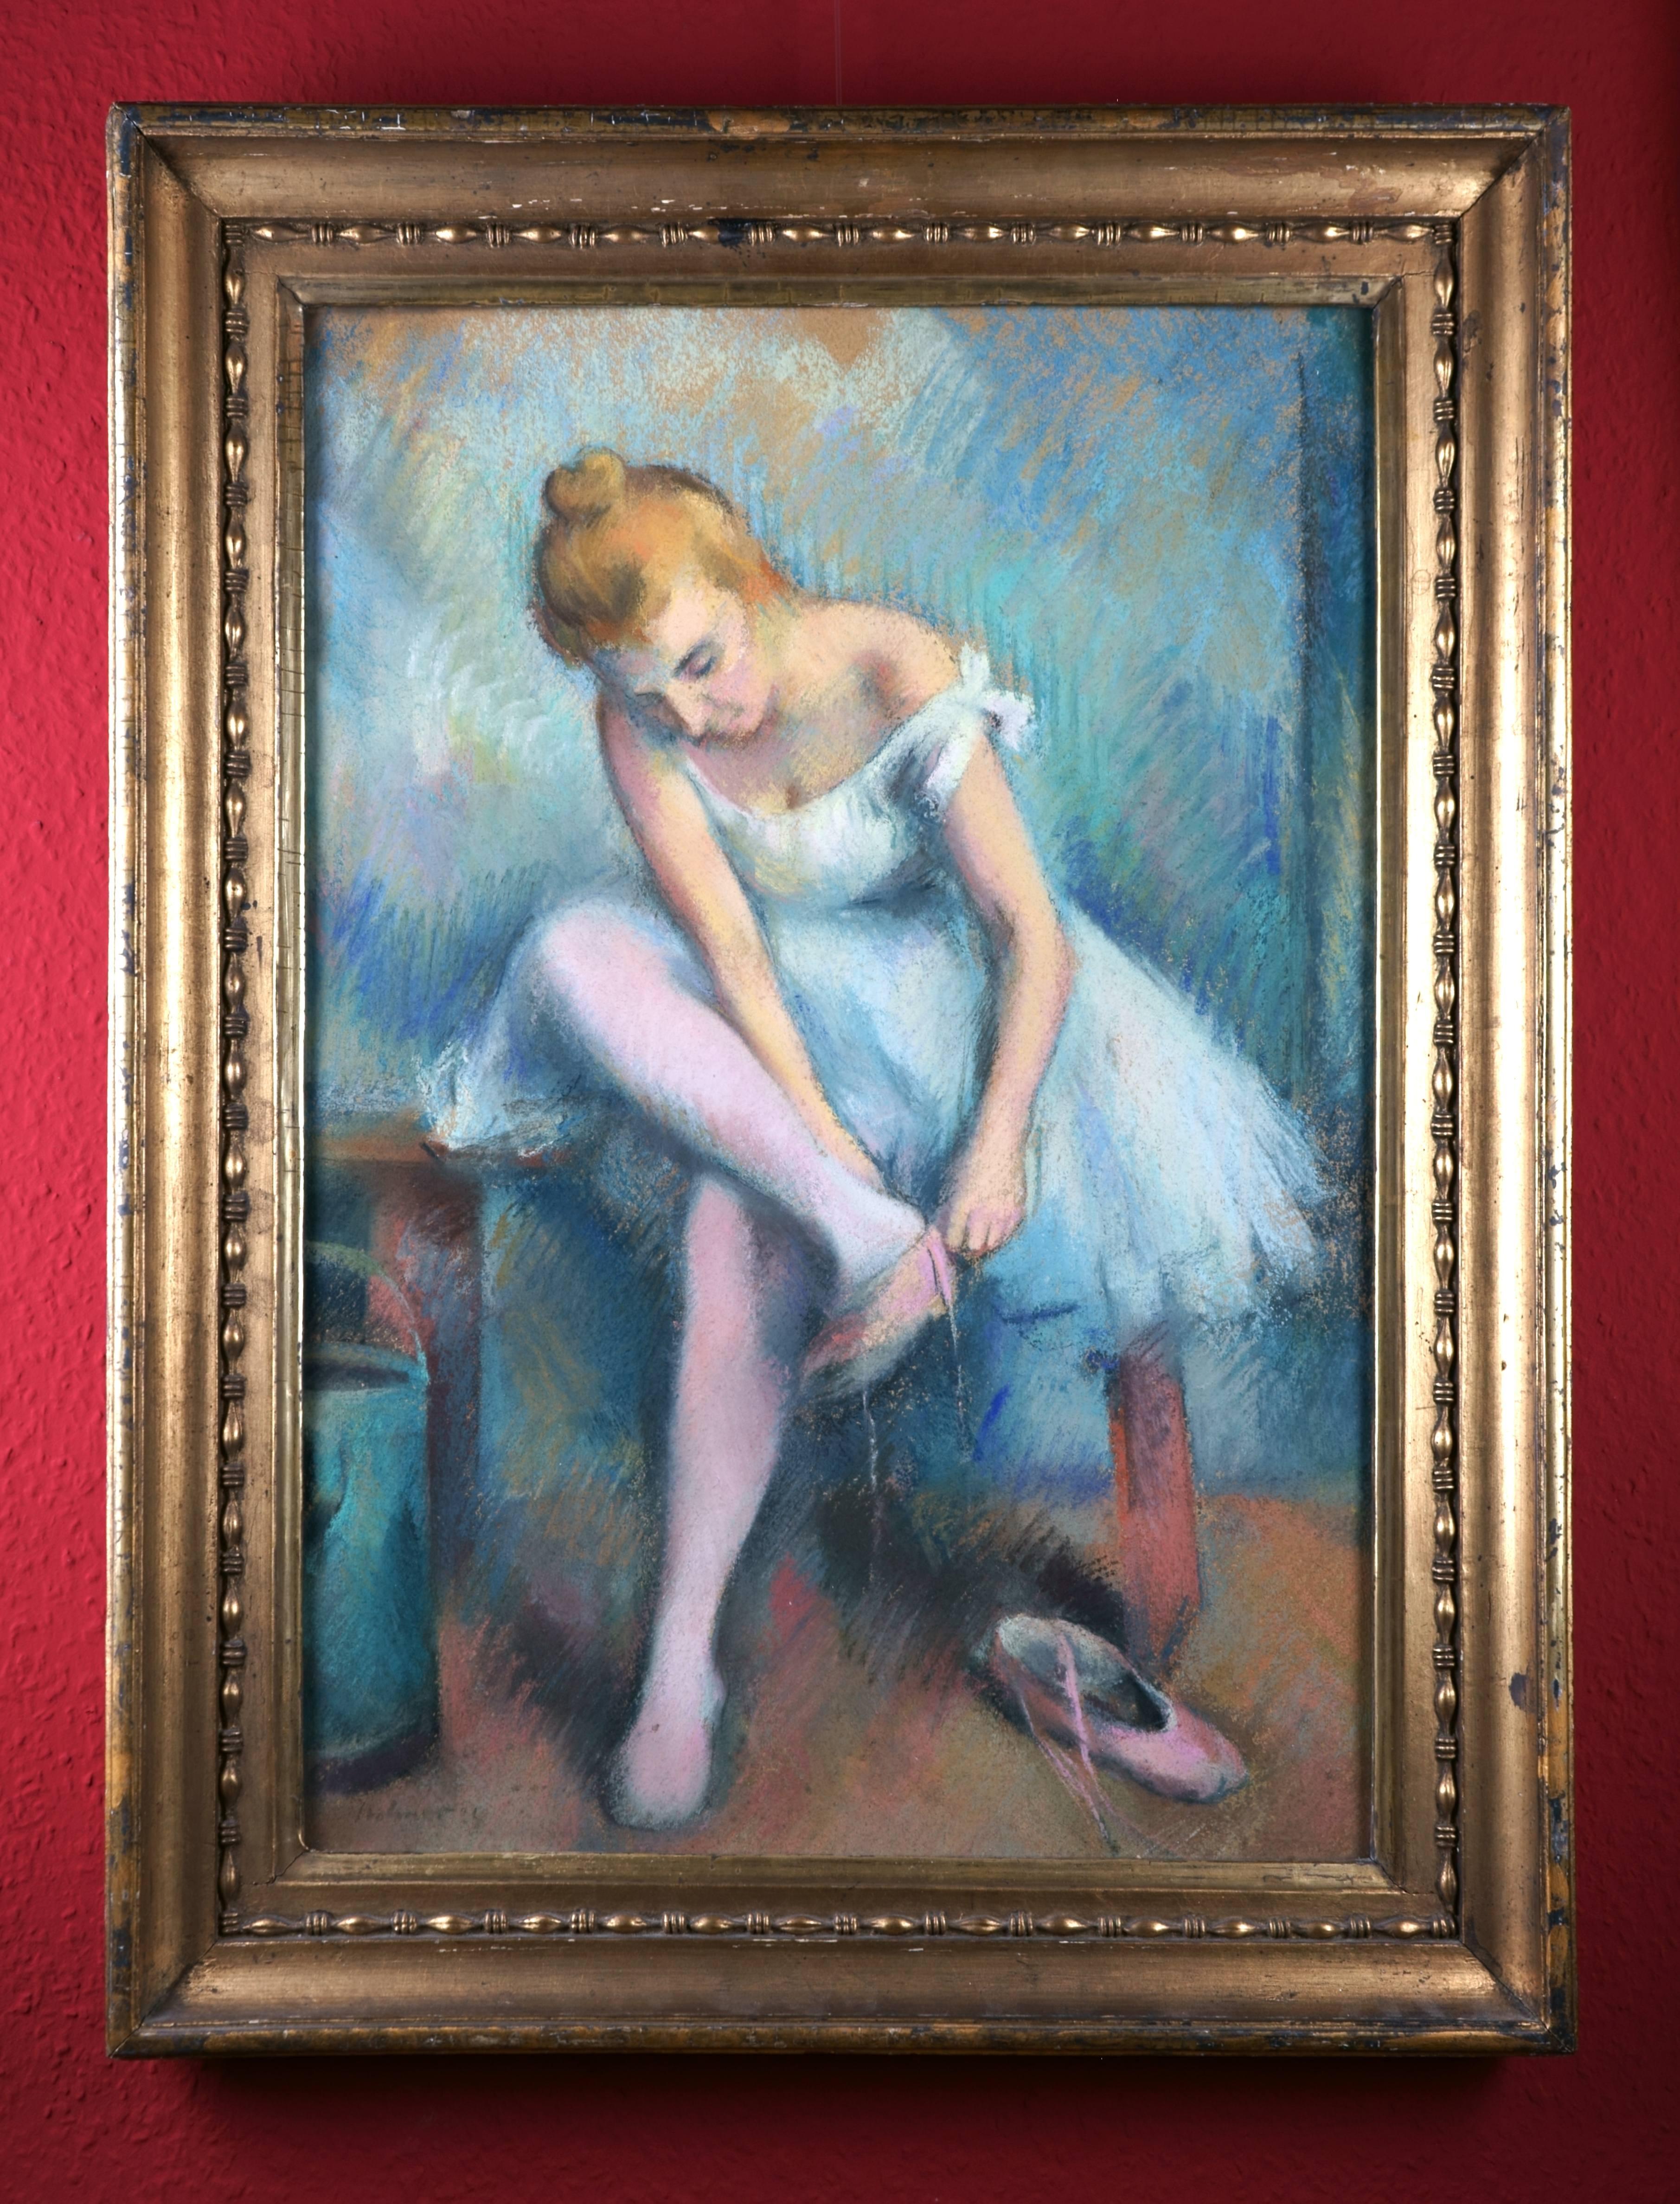 Ballerina in the dressing room - Post-Impressionist Painting by Karl Stohner